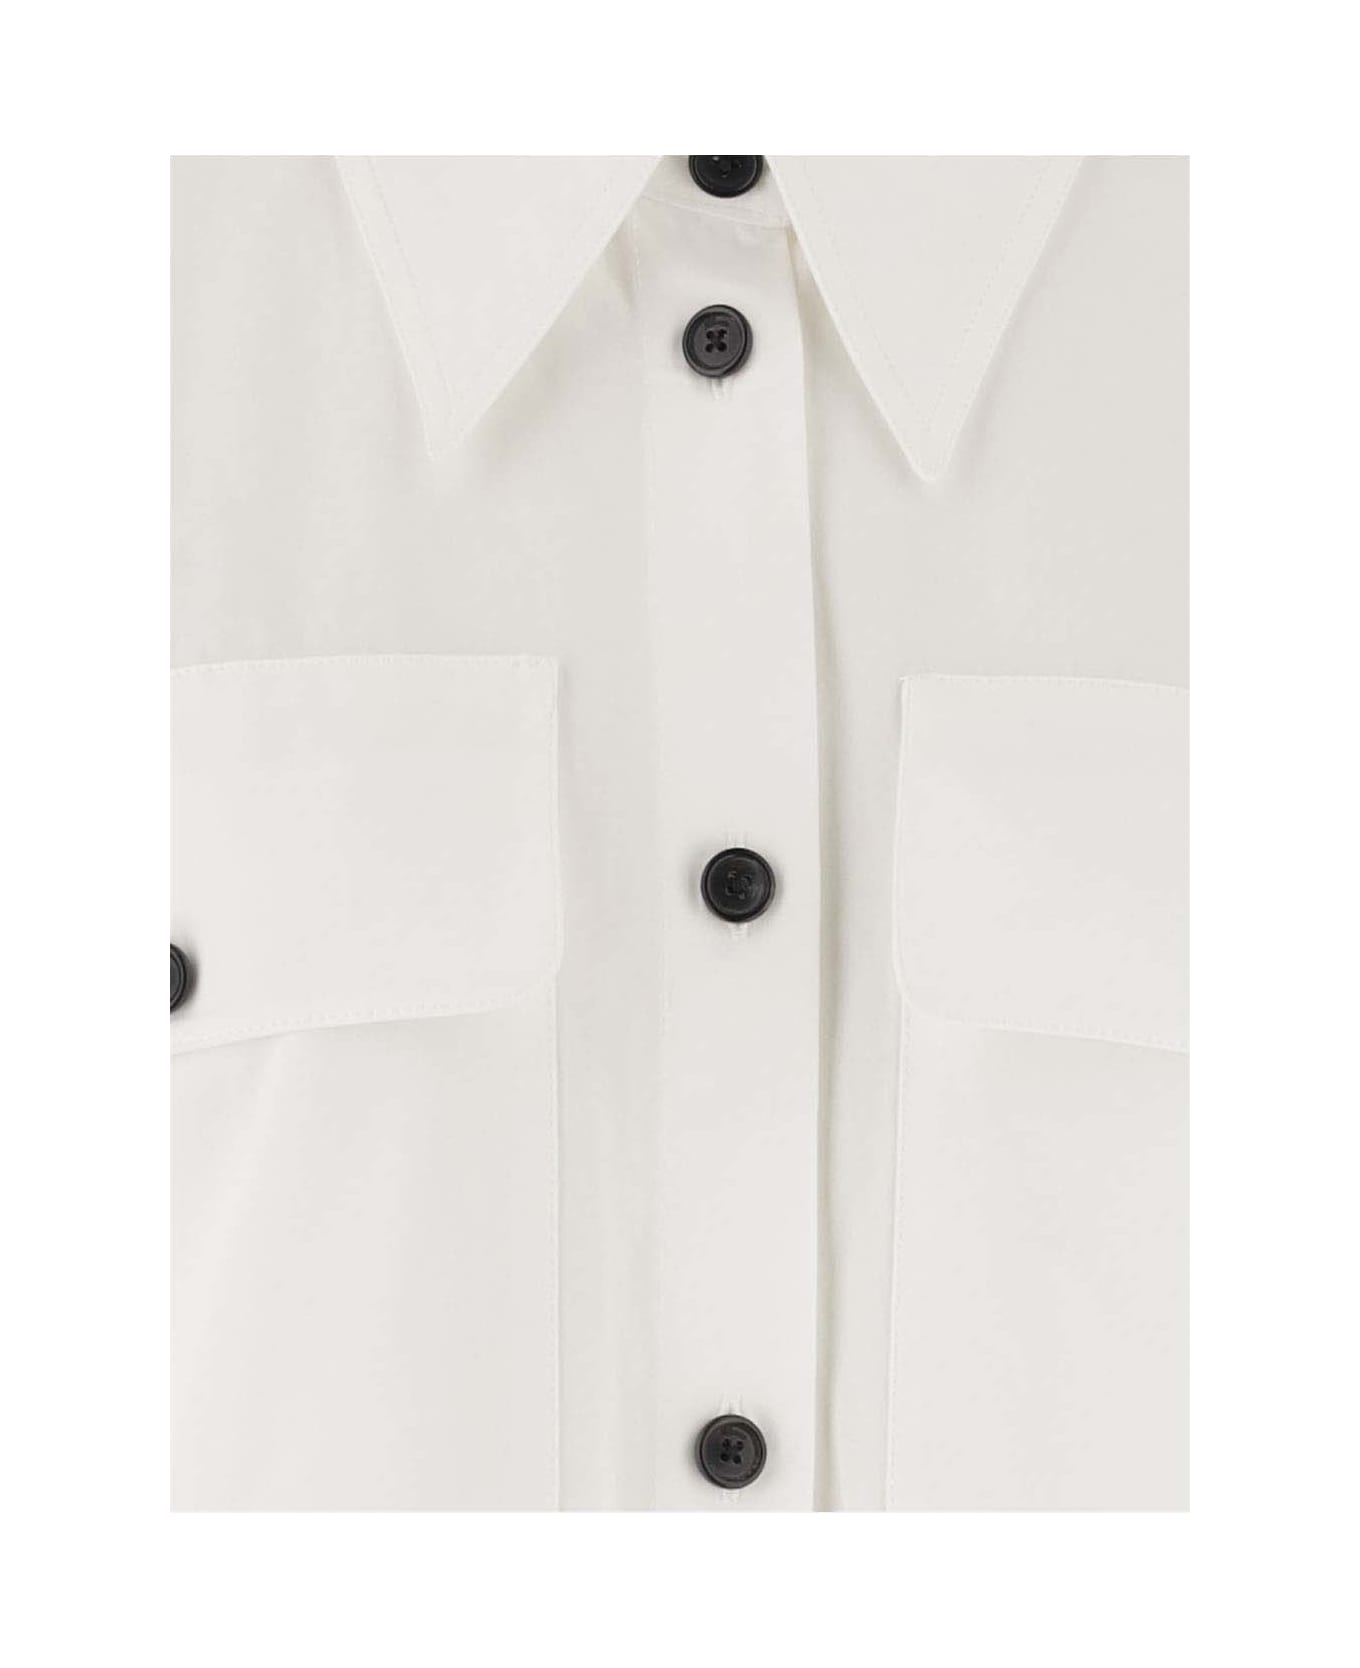 Khaite Cotton Shirt With Contrasting Buttons - White シャツ